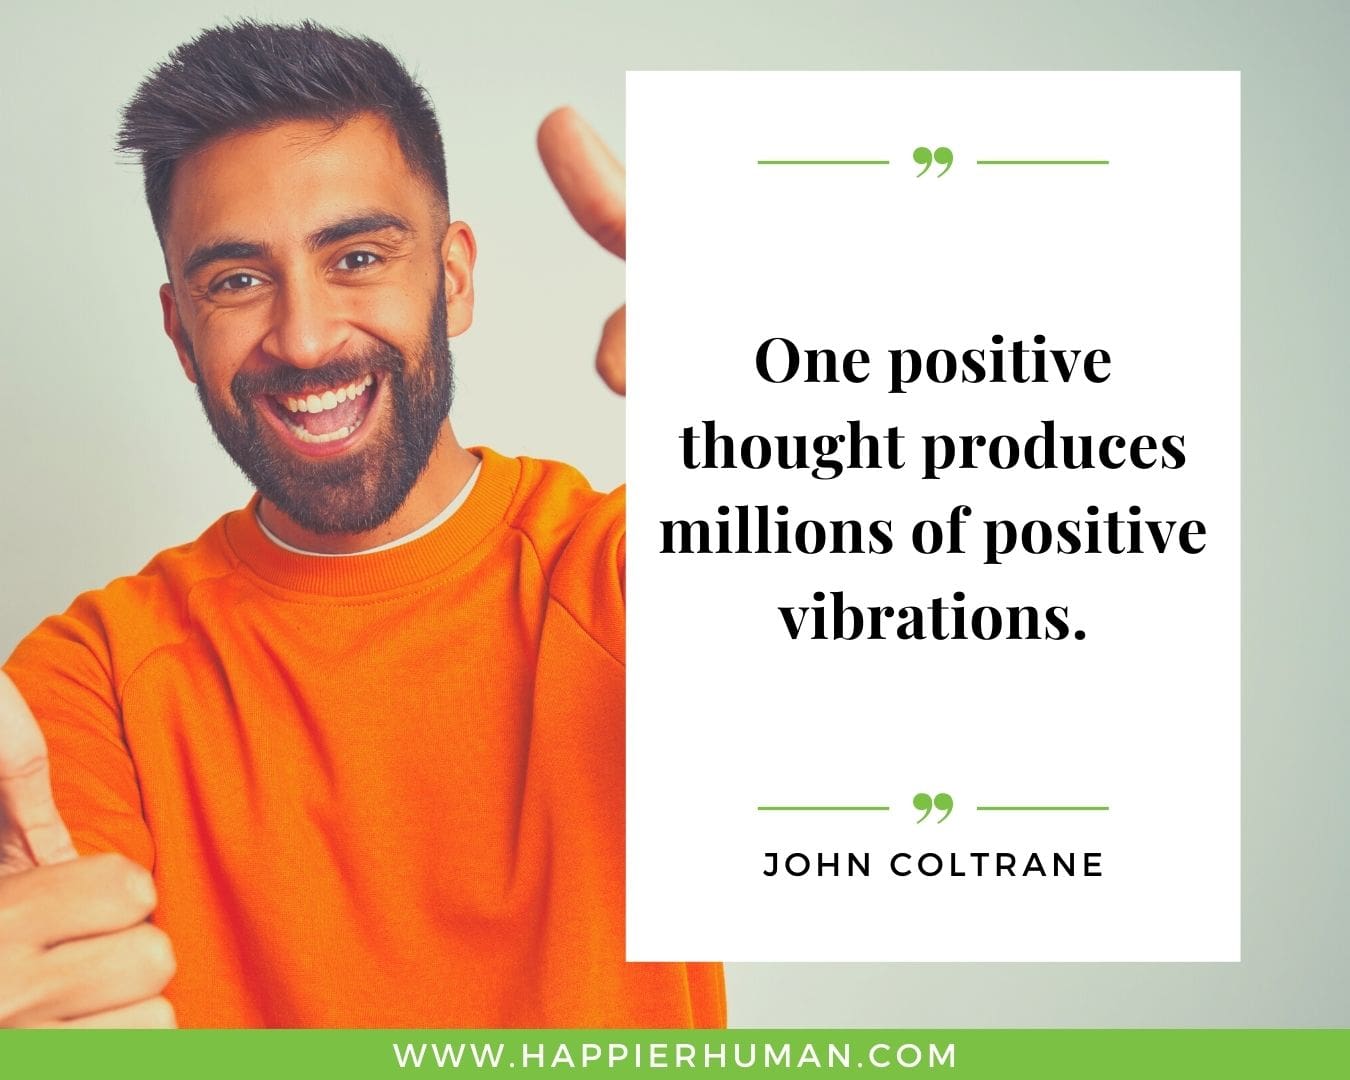 Positive Energy Quotes - “One positive thought produces millions of positive vibrations.” - John Coltrane